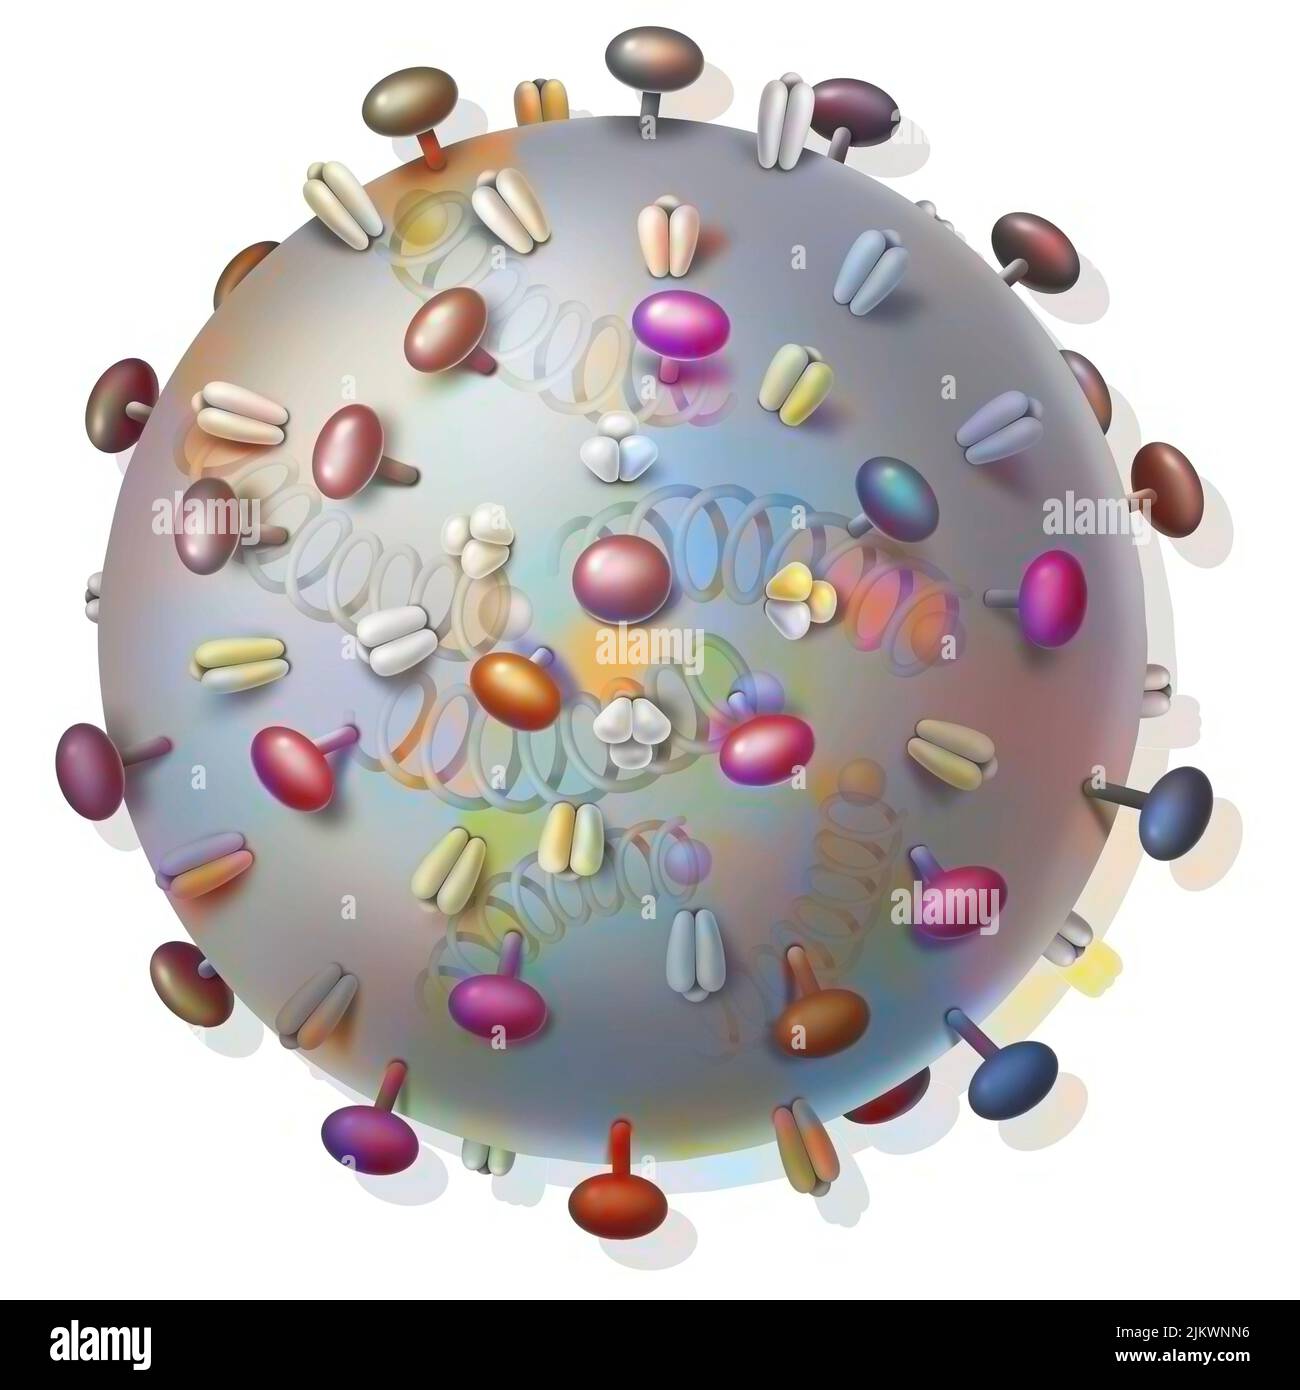 Influenza viruses and proteins that bind to host cells. Stock Photo